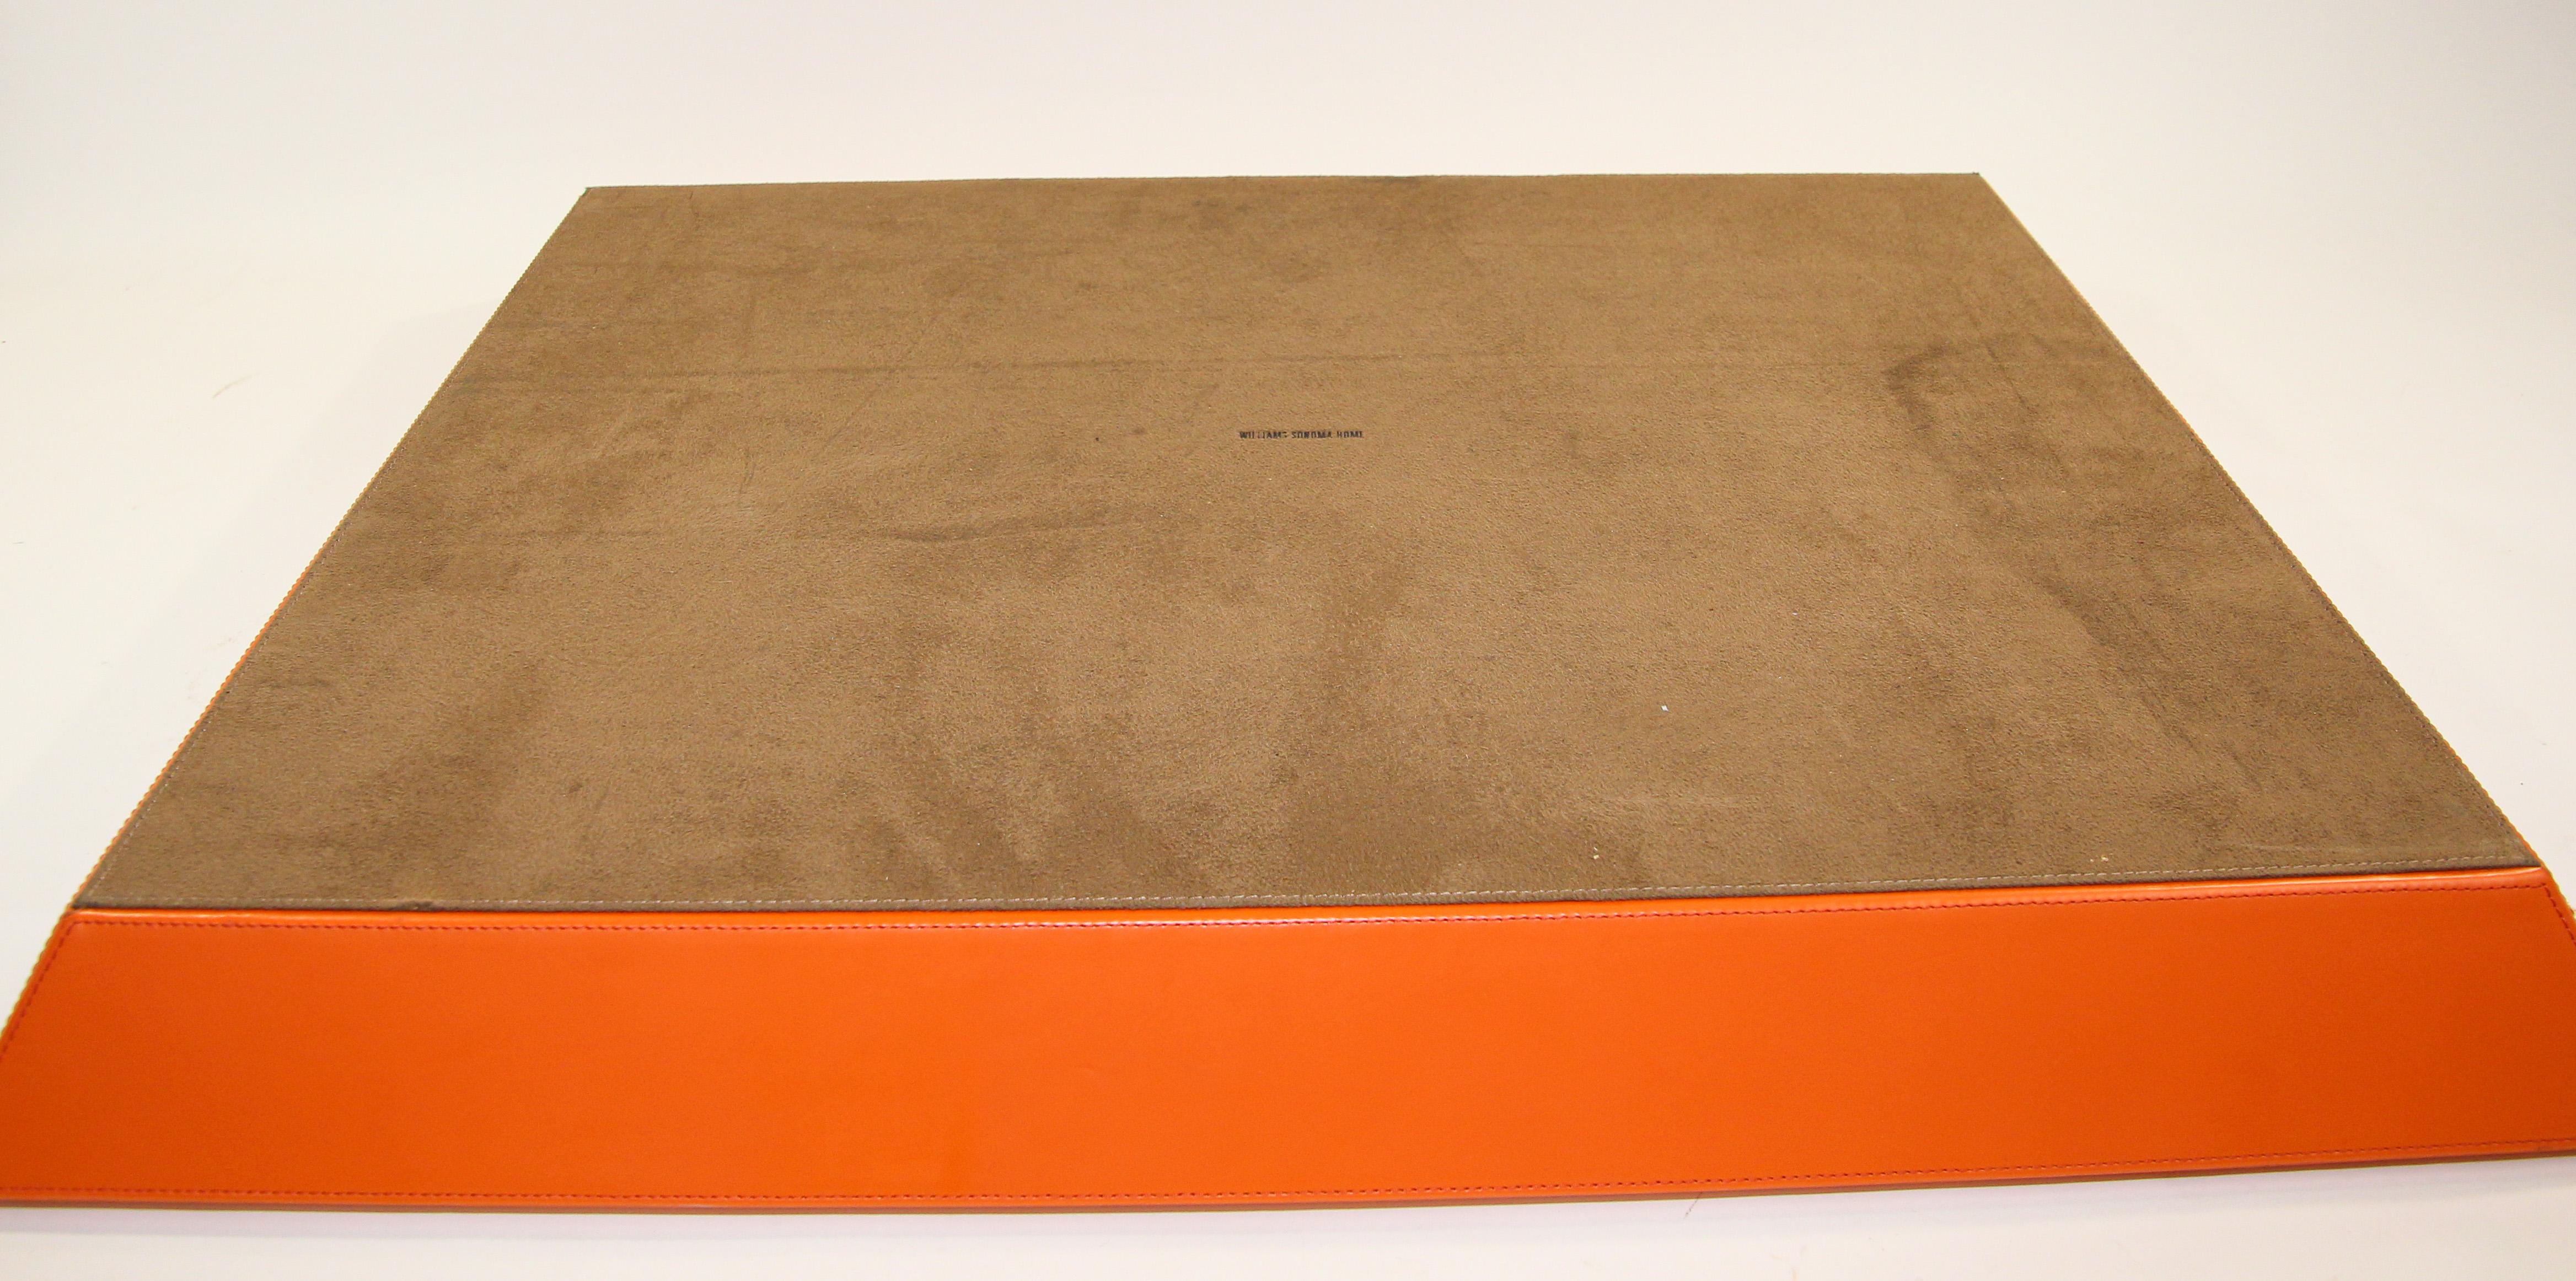 Large Vintage Orange Tray with Handles by Williams Sonoma Home 5